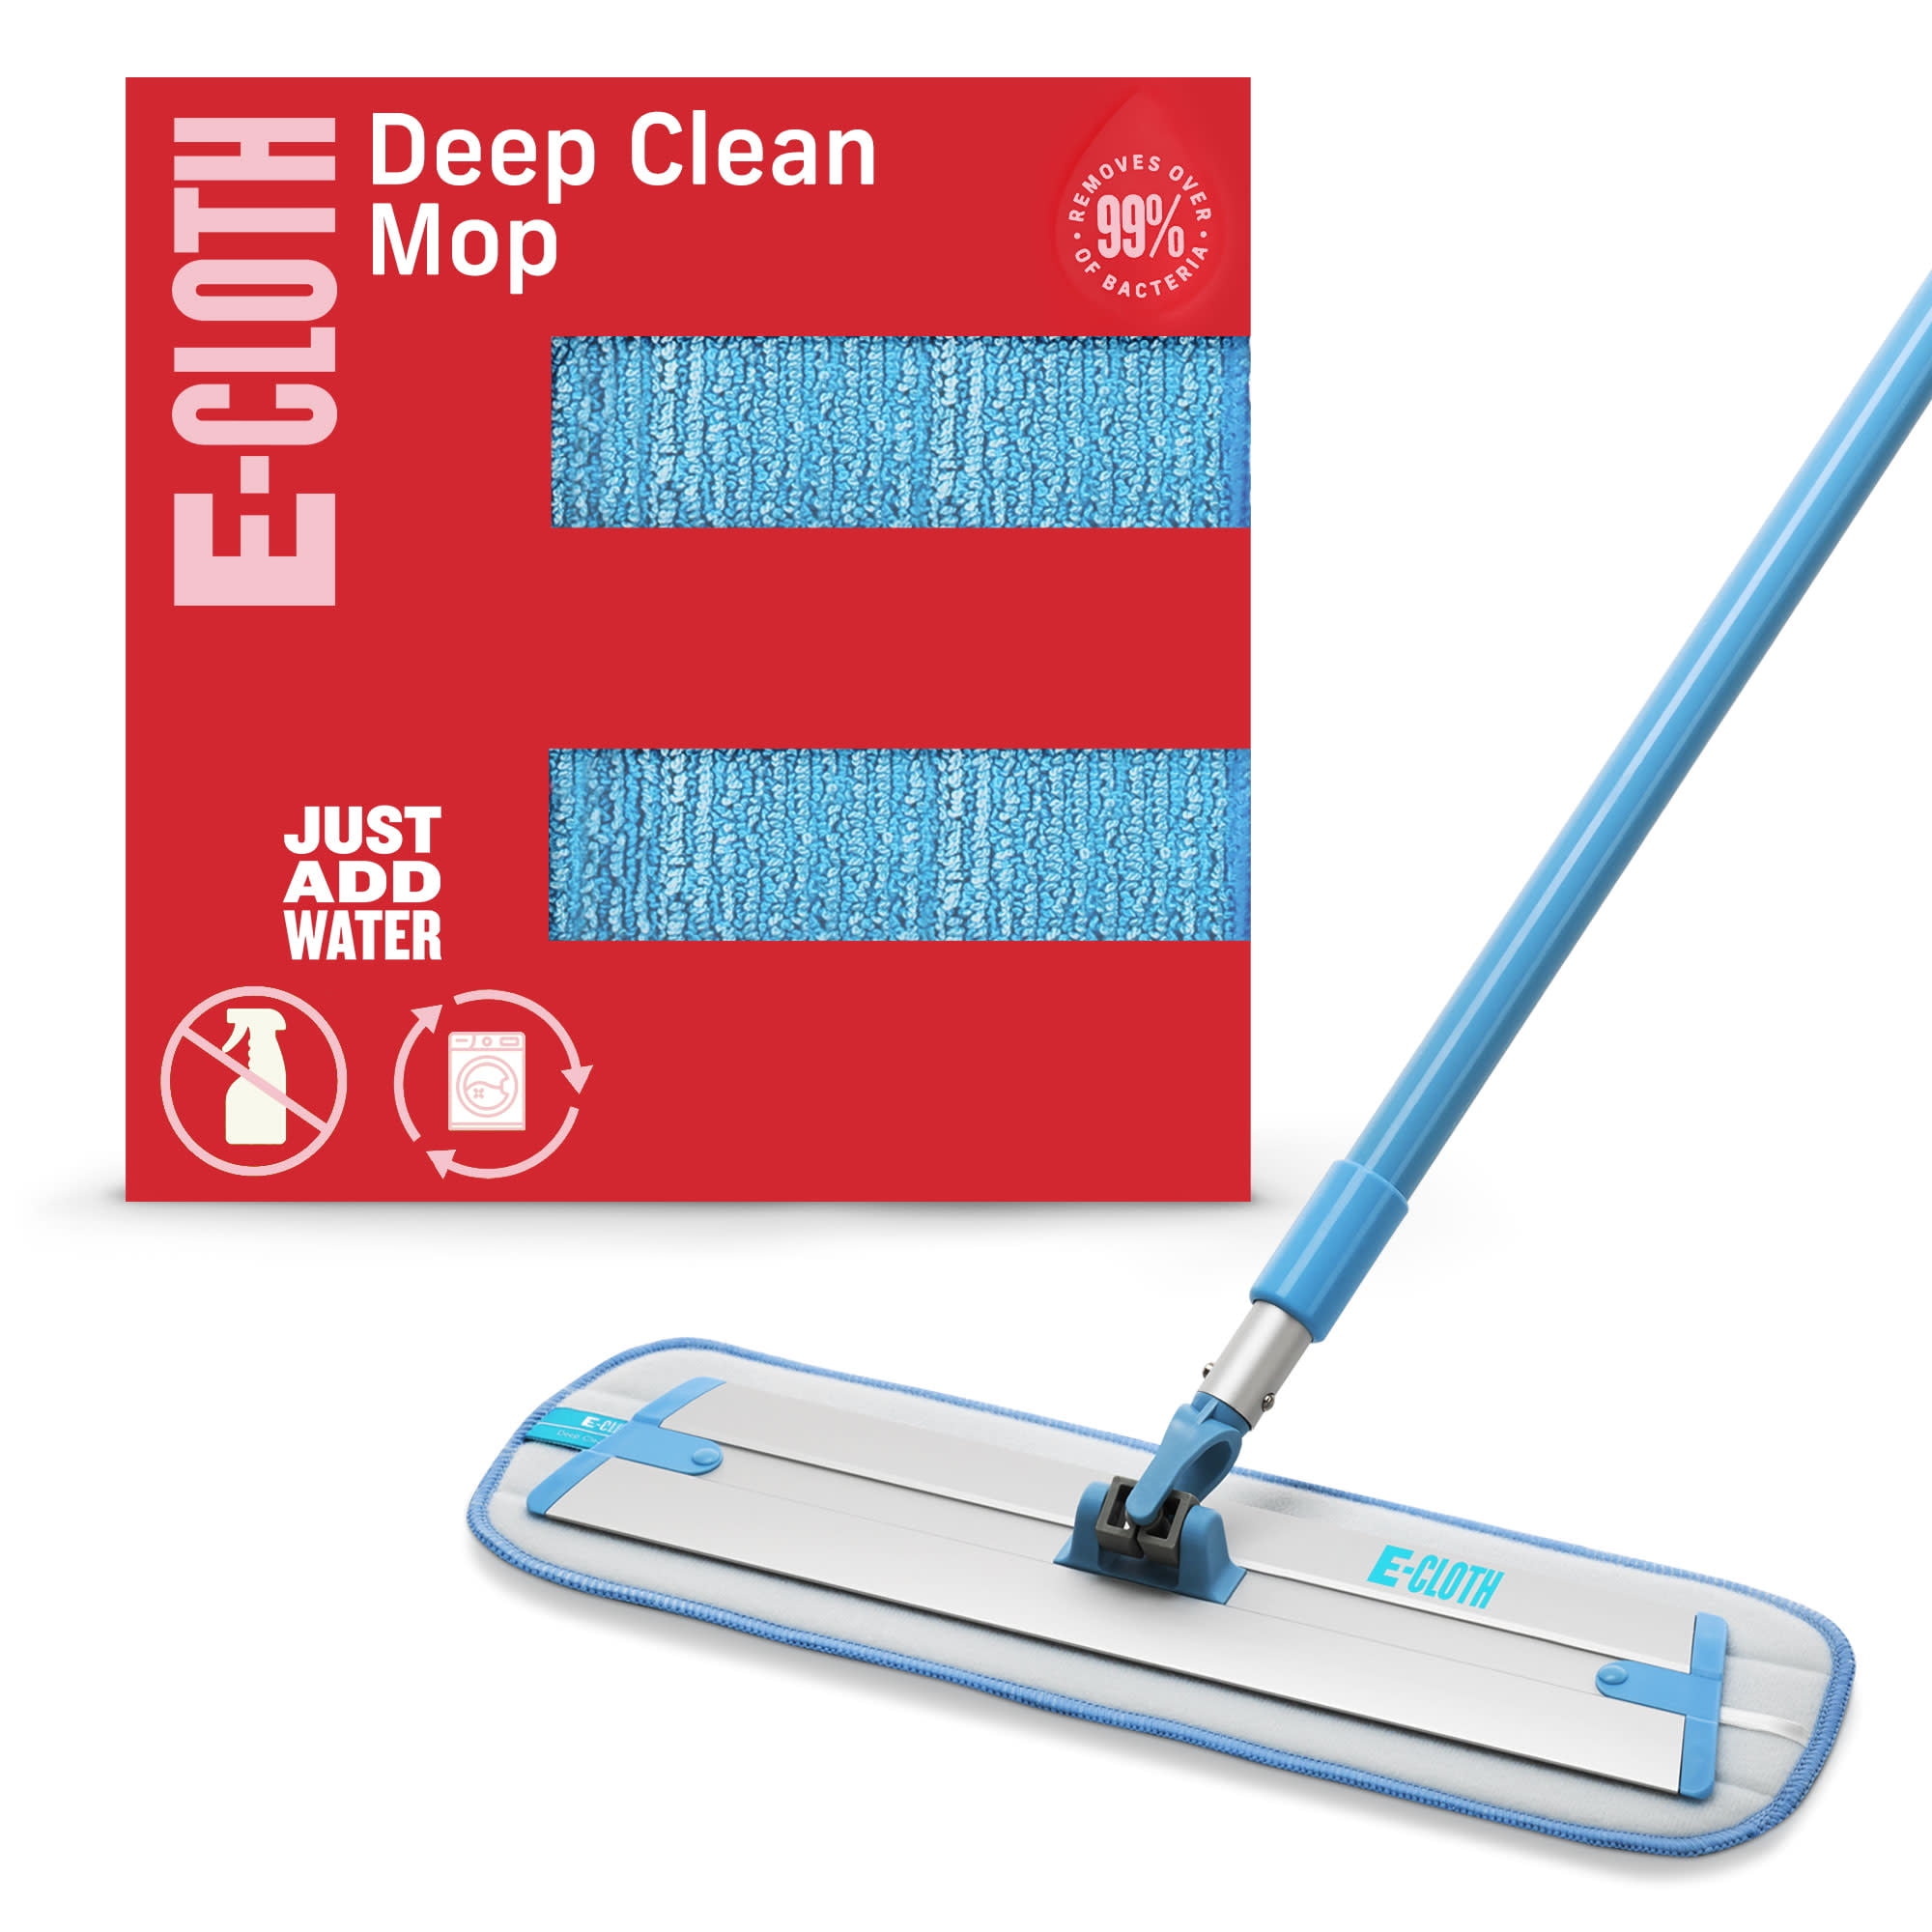 Wiper Covers/Mops 60 cm Mop ECO NEW Washable Mop Cover 